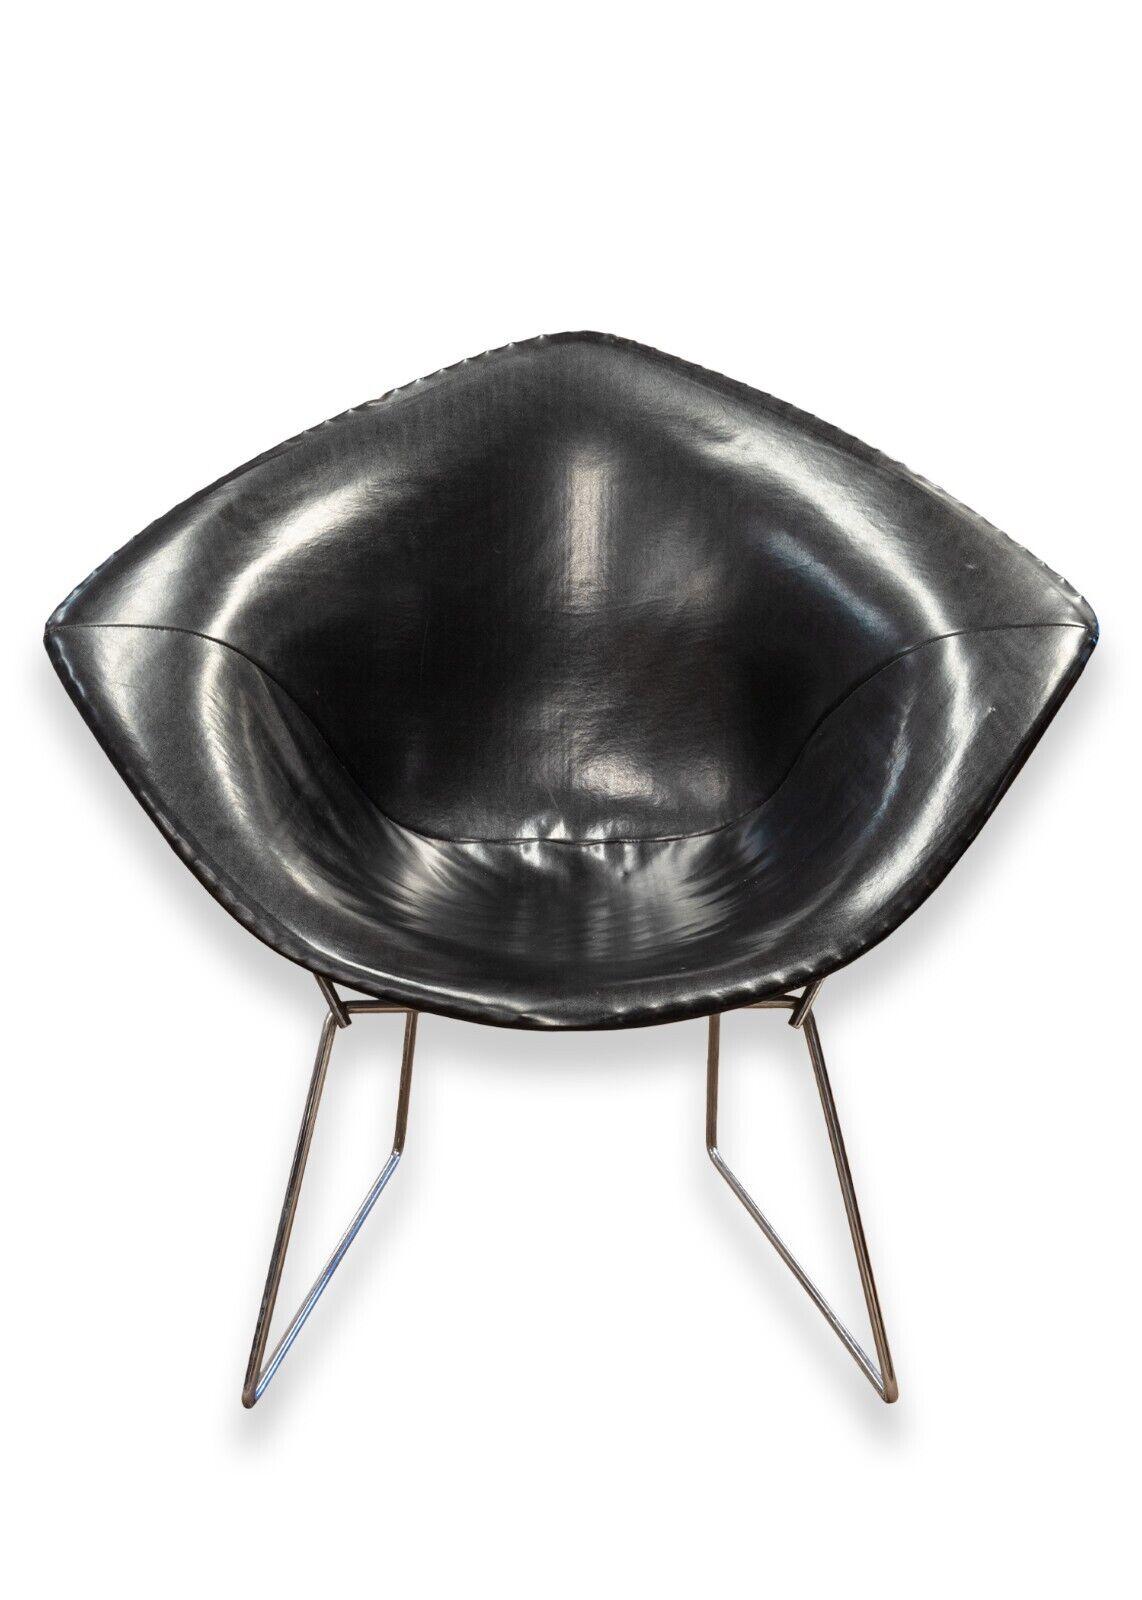 An early mid century modern Bertoia for Knoll metal and leather Diamond Associate accent chair. A super iconic chair from a pair of super iconic names. This chair features the classic diamond Bertoia design, the beautiful metal frame, and a super